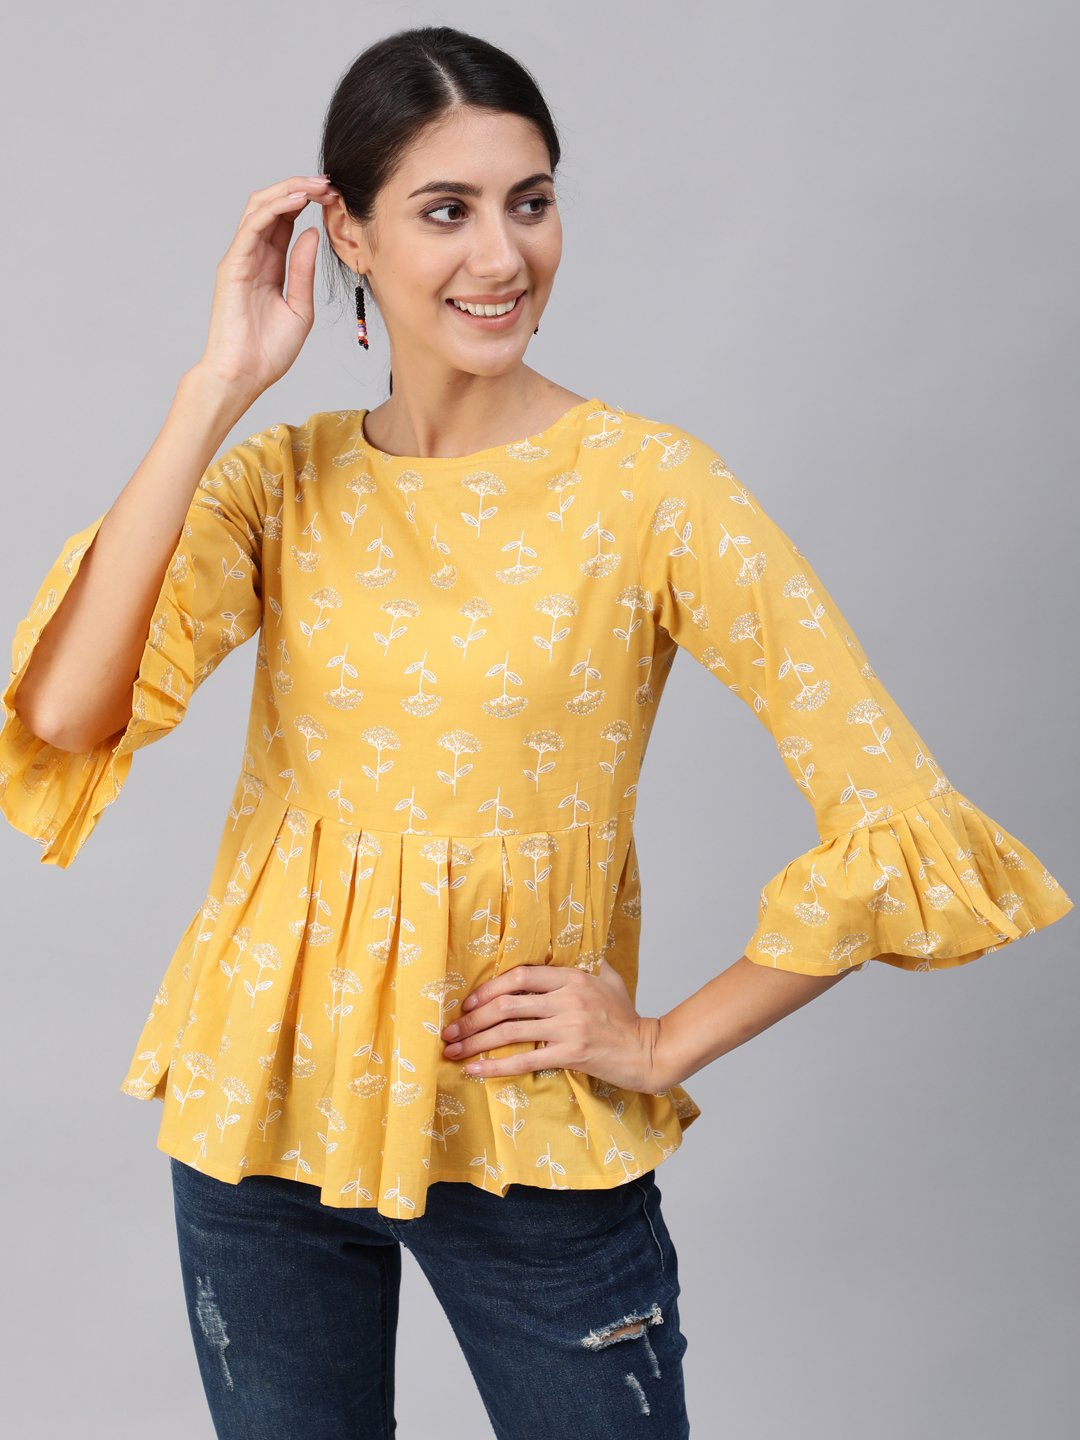 Women's Yellow & Silver Printed Top With Three Quarter Flared Sleeves - Nayo Clothing